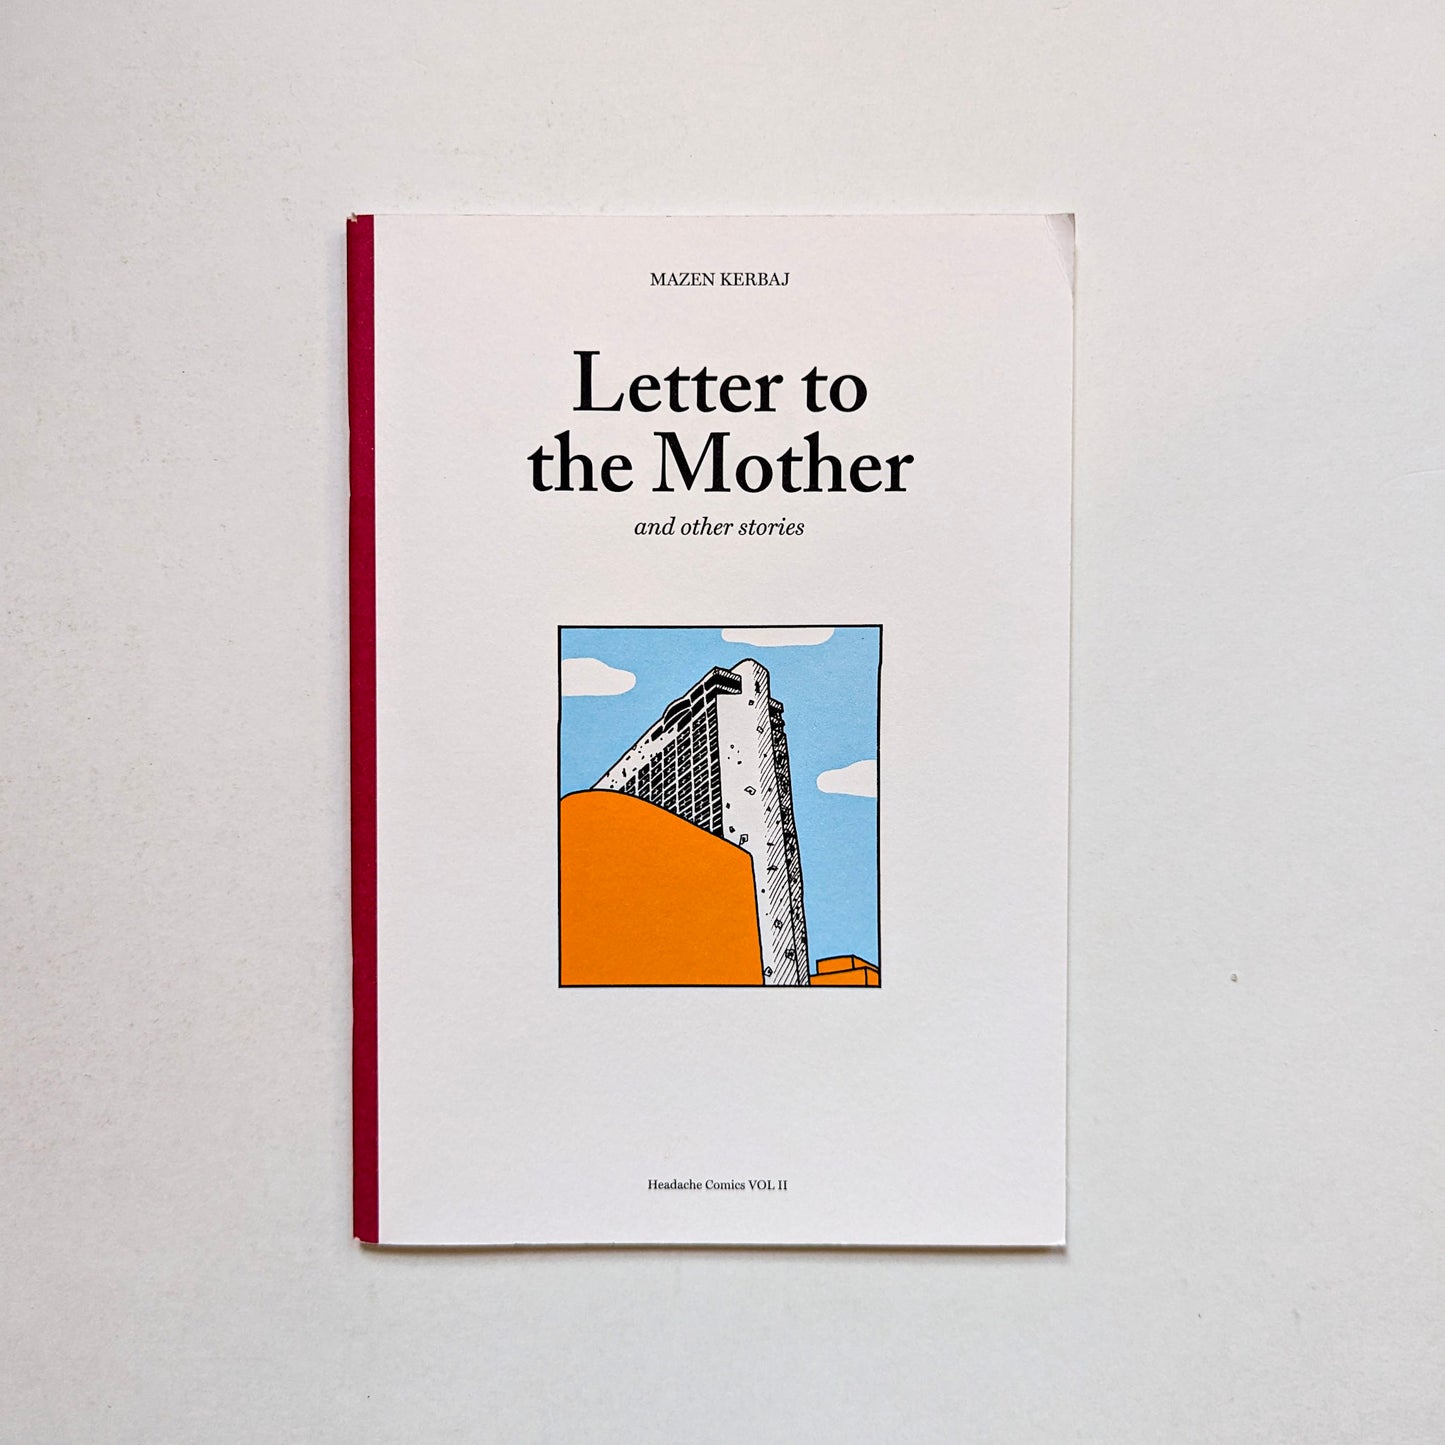 Letter to the Mother by Mazen Kerbaj